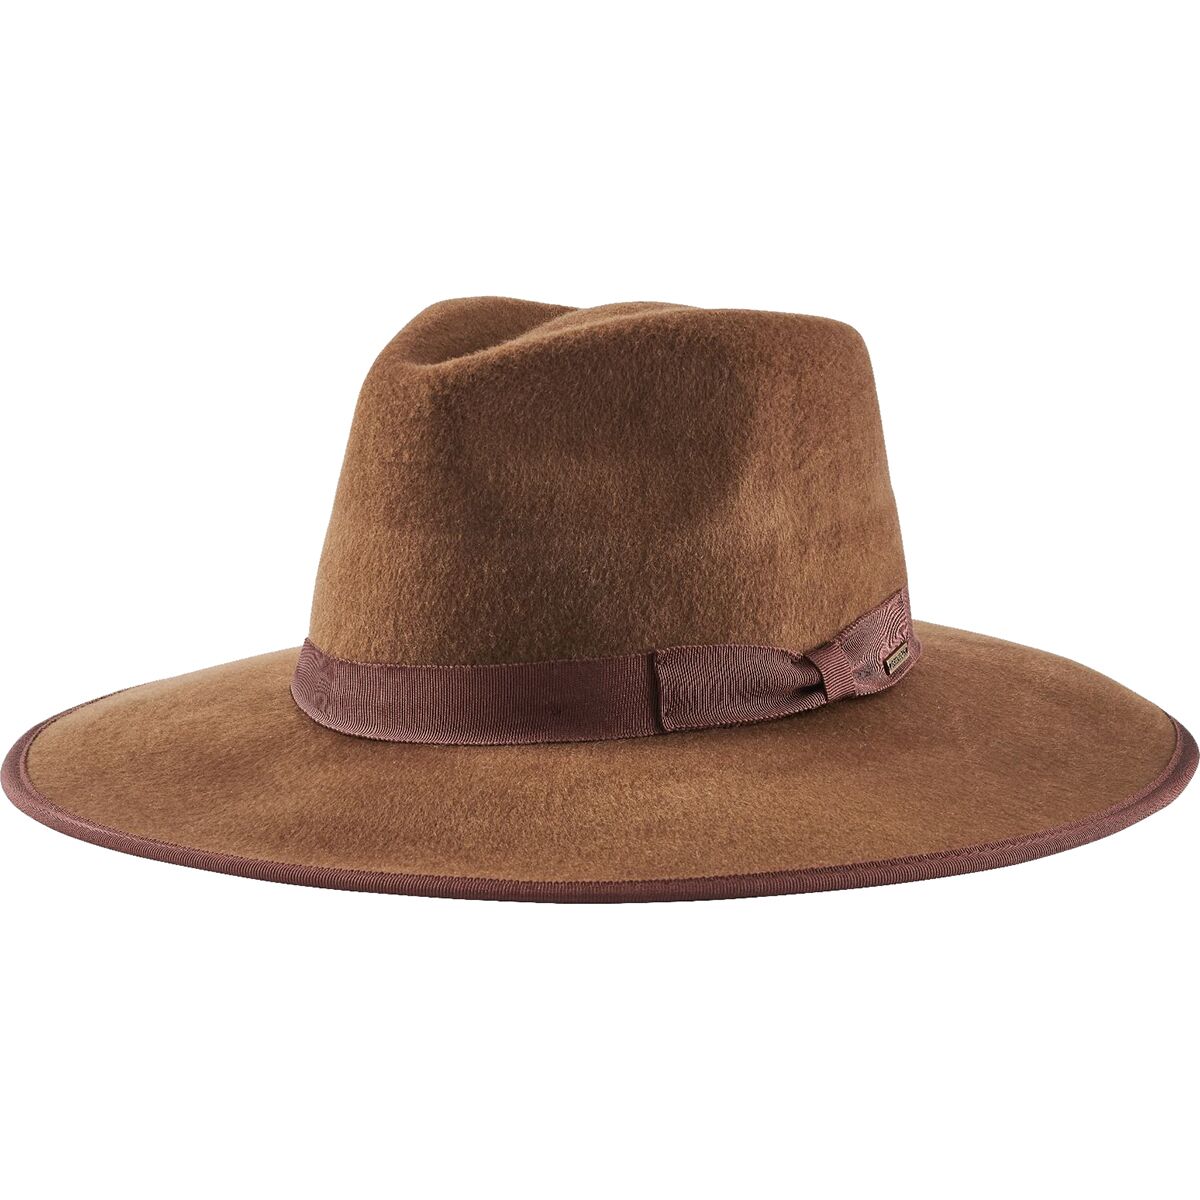 Brixton Joanna Rancher Hat - Accessories | Backcountry